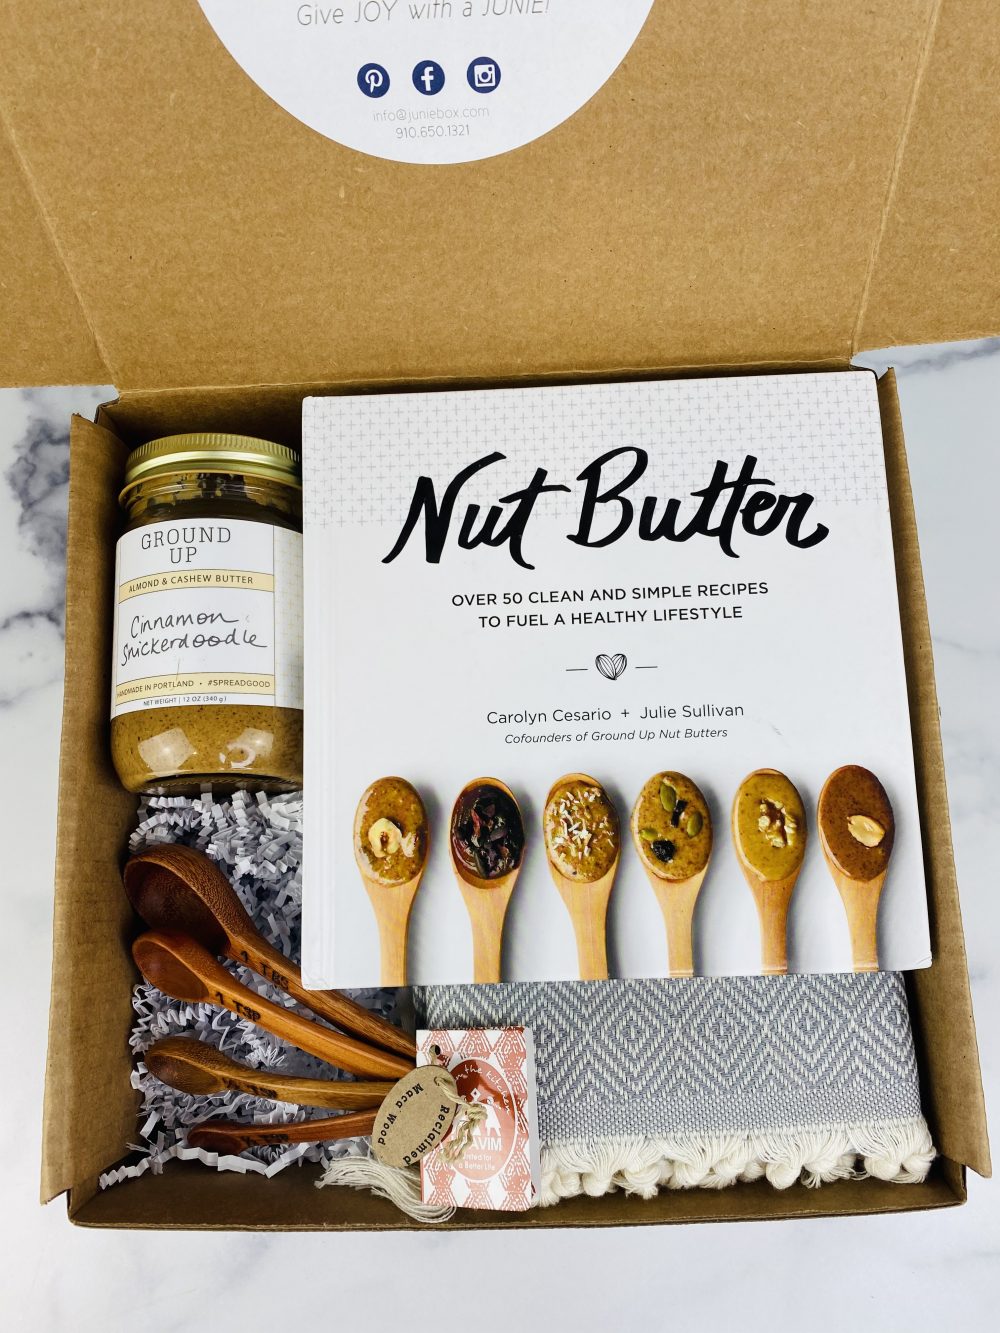 The Nut Butter Box